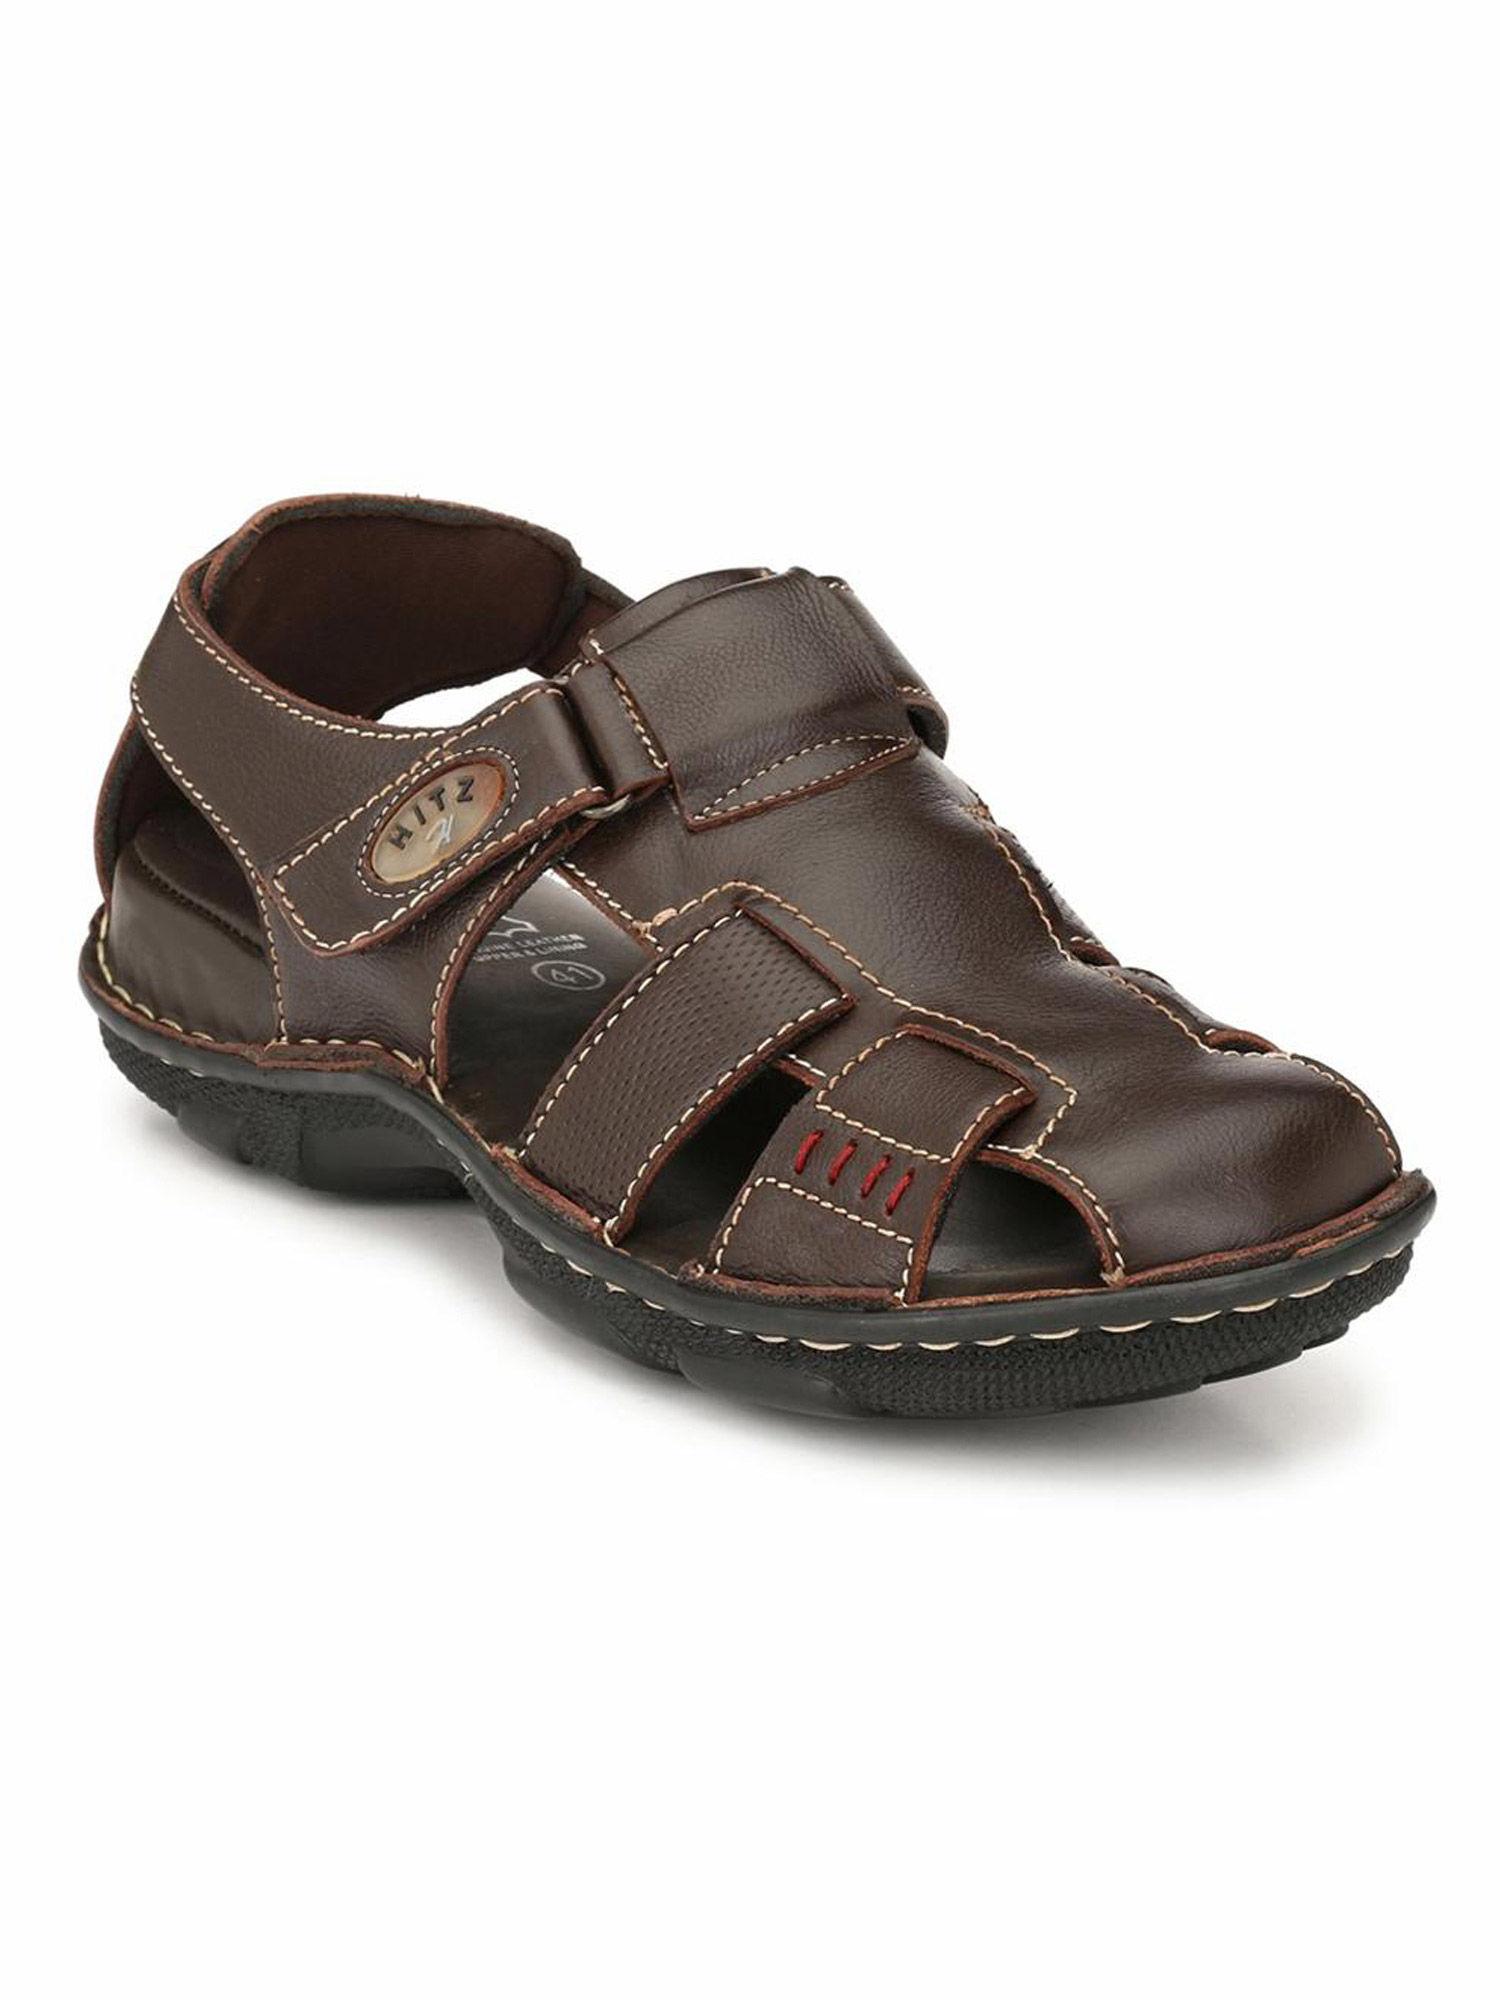 men's brown leather comfort sandals with velcro closure